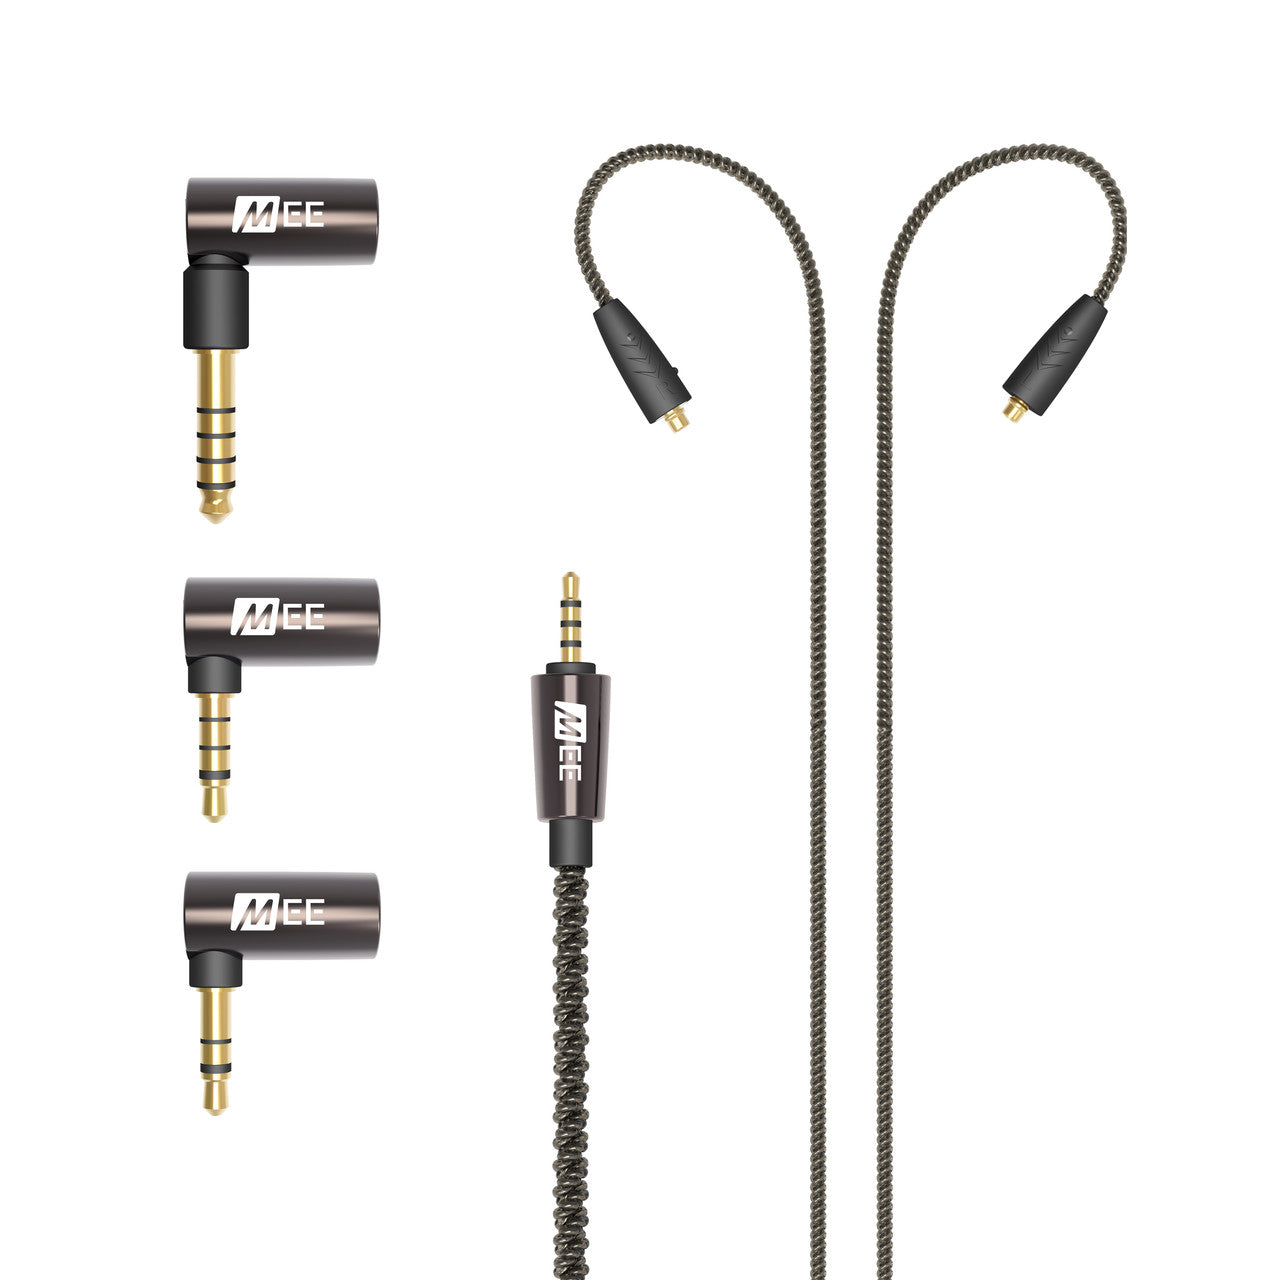 Image of Pinnacle P1 Balanced Edition: Includes Balanced Cable and Adapter Set.